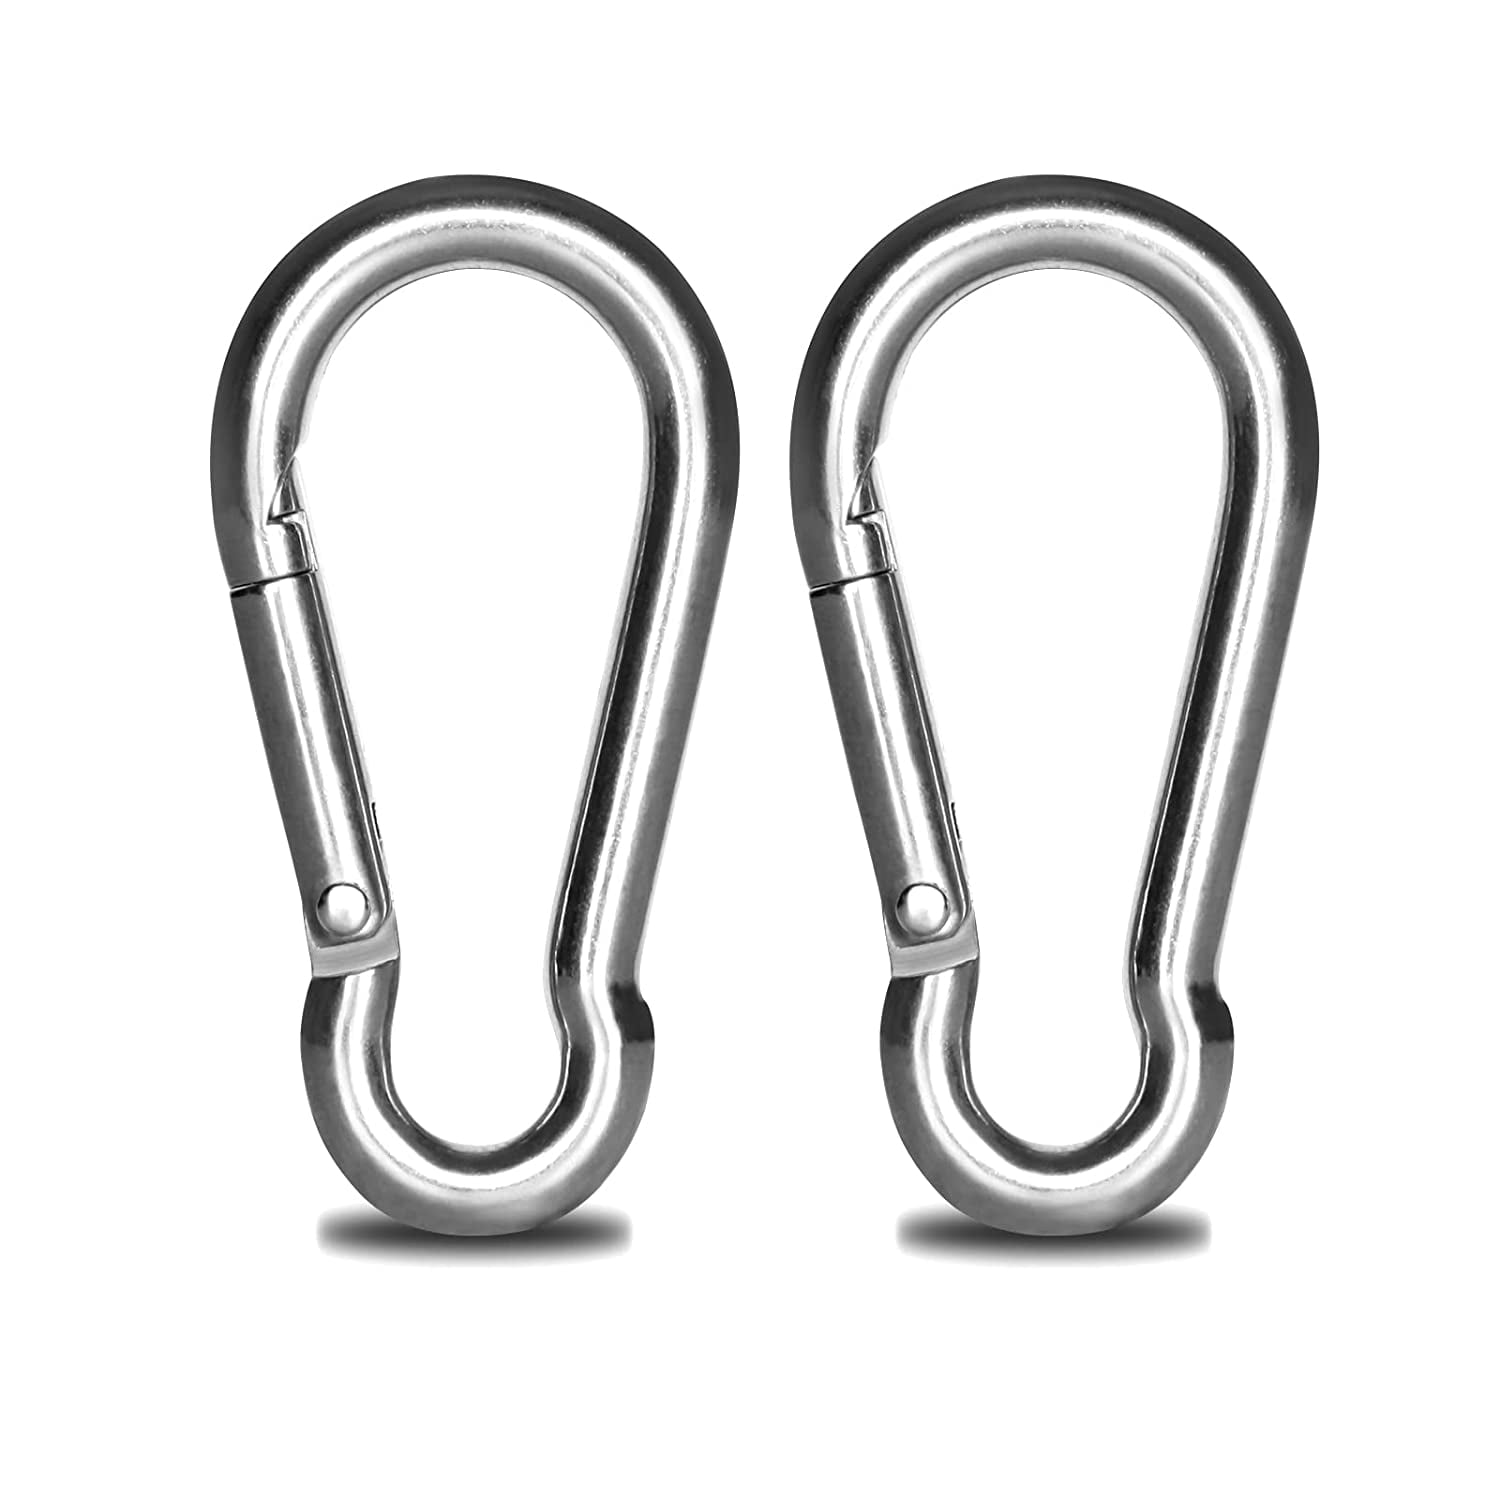 Carabiner Clip, Spring Snap Hooks, Heavy Duty Stainless Steel 304 ,Small  Carabiner Clips ,in/Outdoor Rope Connector 6Pack